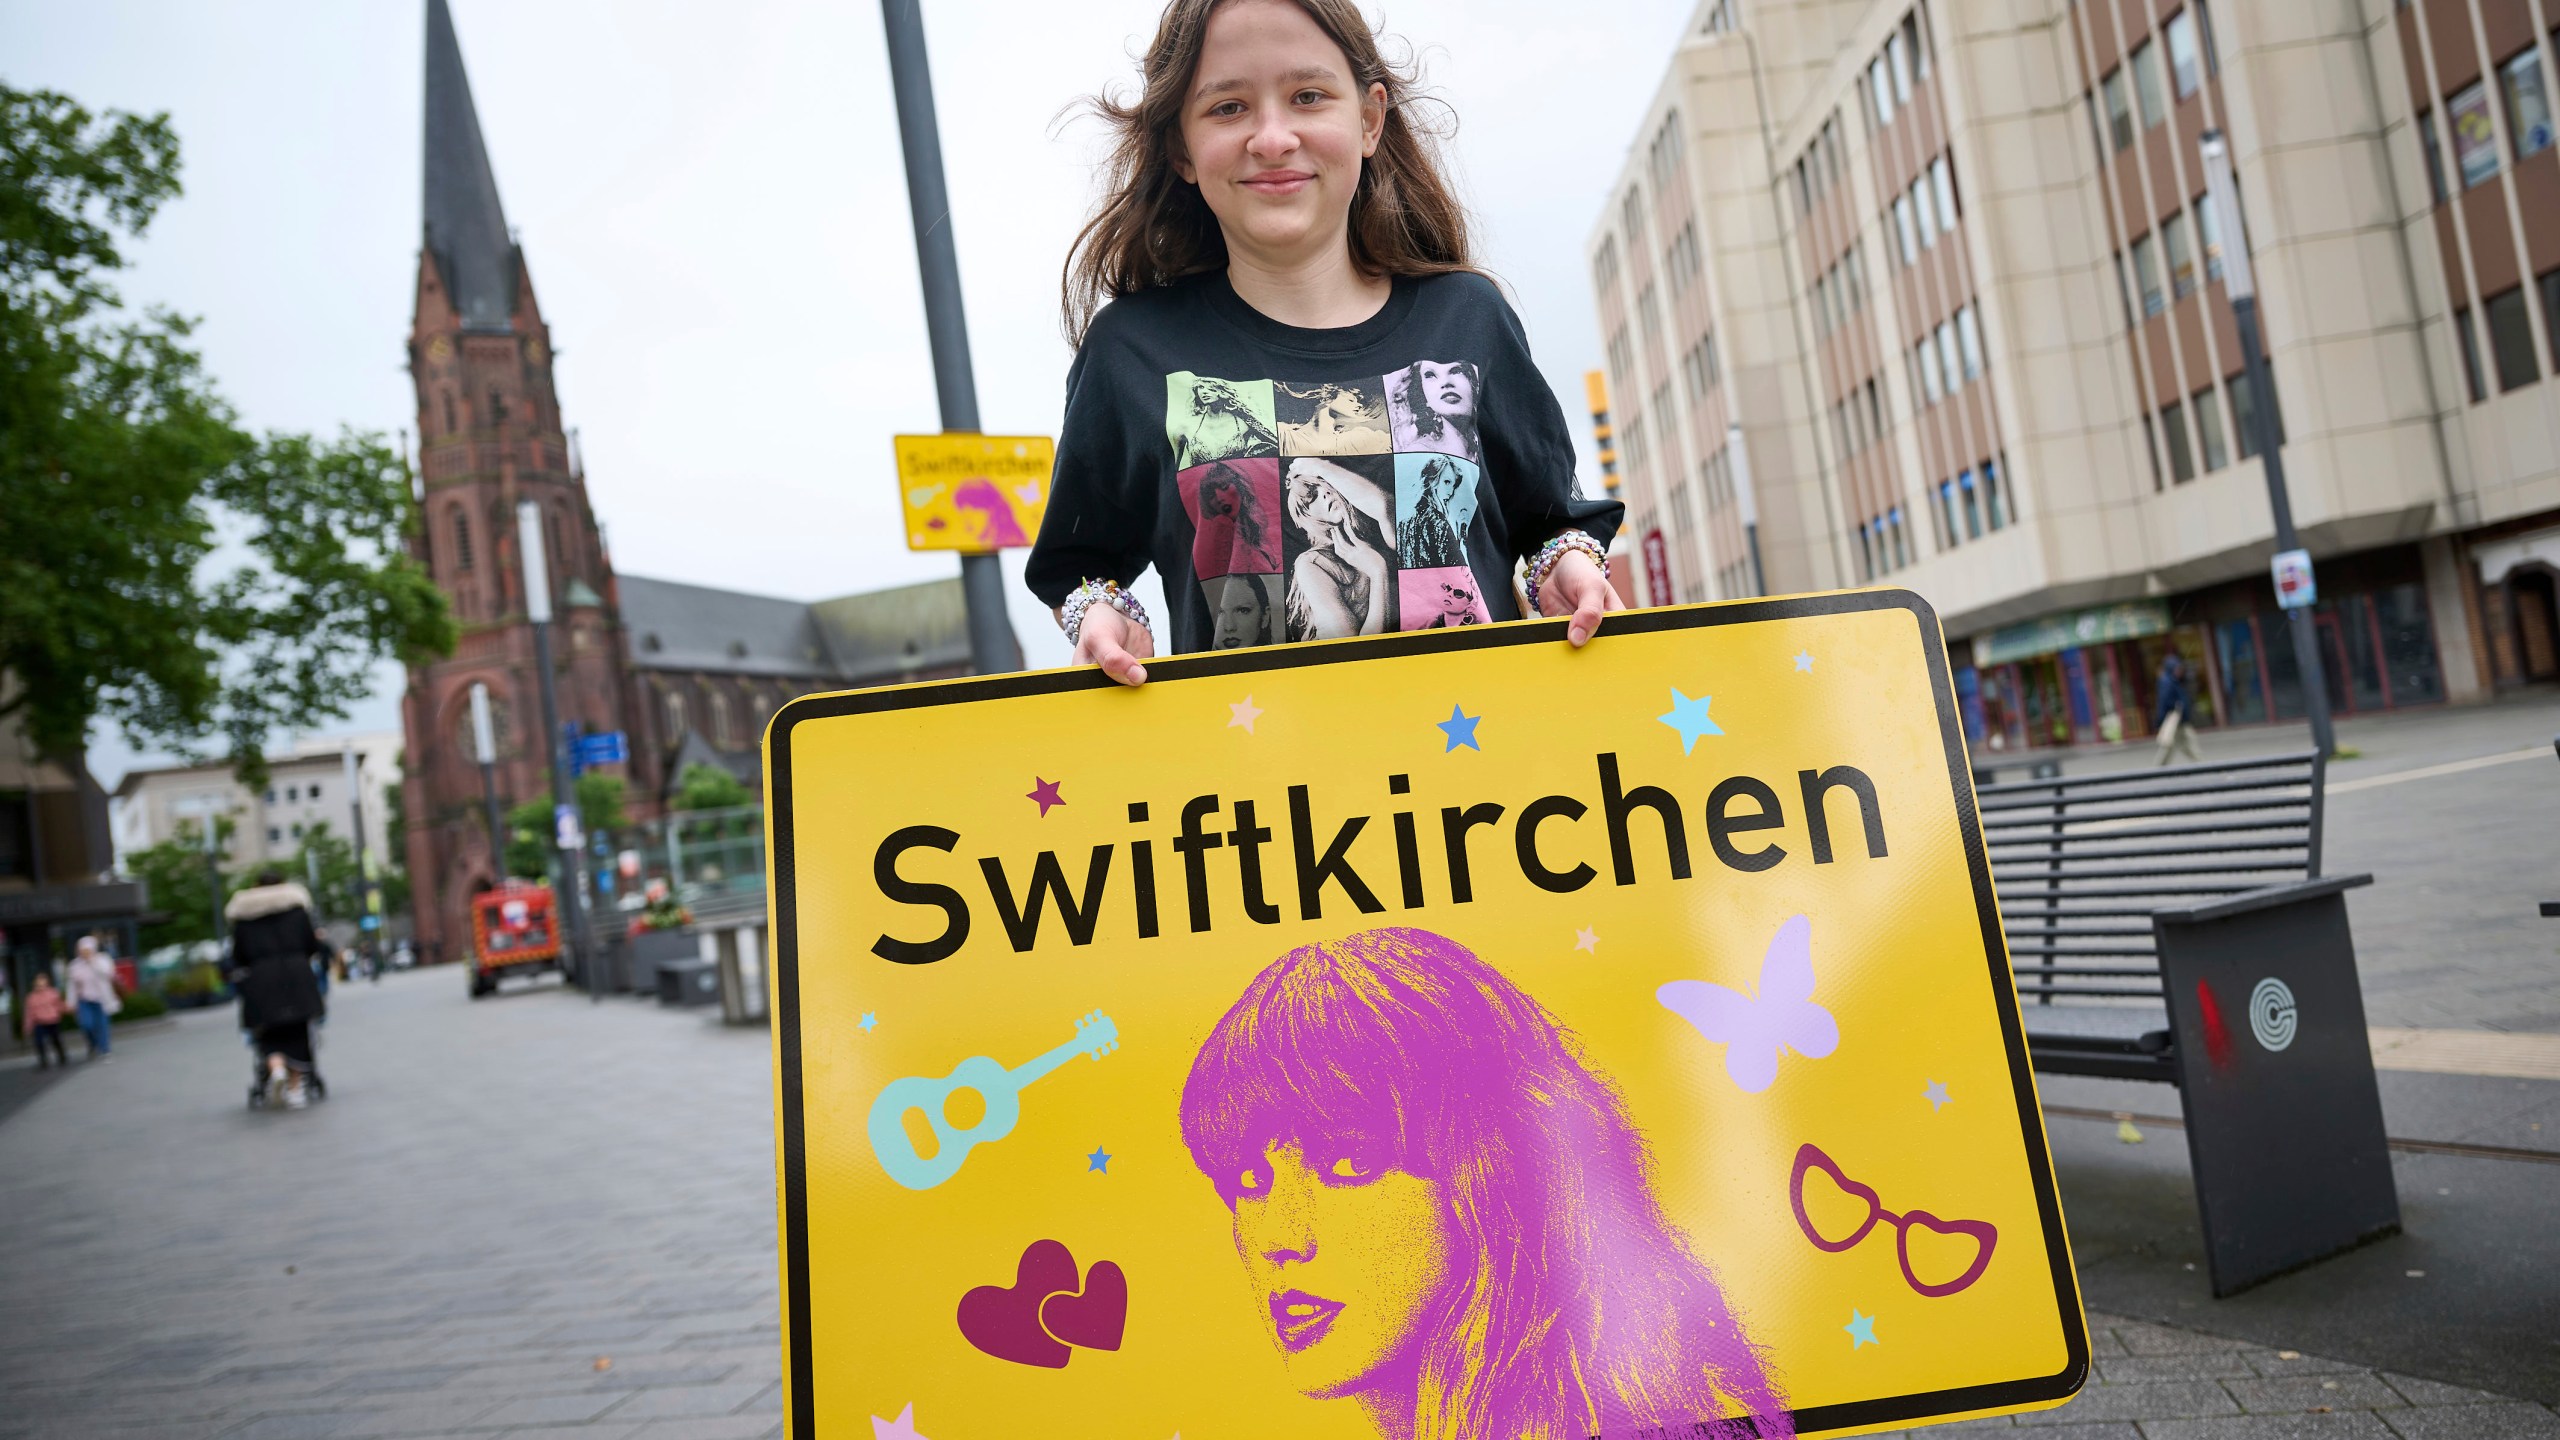 Schoolgirl Aleshanee Westhoff shows a "Swiftkirchen" town sign in honor of musician Taylor Swift in Gelsenkirchen, Germany, Tuesday, July 2, 2024. The Swifties are about to take over the German city of Gelsenkirchen, where American superstar Taylor Swift is set to give three concerts of her Eras Tour later this month. In honor of the singer, the city renamed itself “Swiftkirchen" — at least temporarily to welcome the tens of thousands of fans who are expected to come for the Eras Tour shows on July 17, 18 and 19, German news agency dpa reported. (Bernd Thissen/dpa via AP)